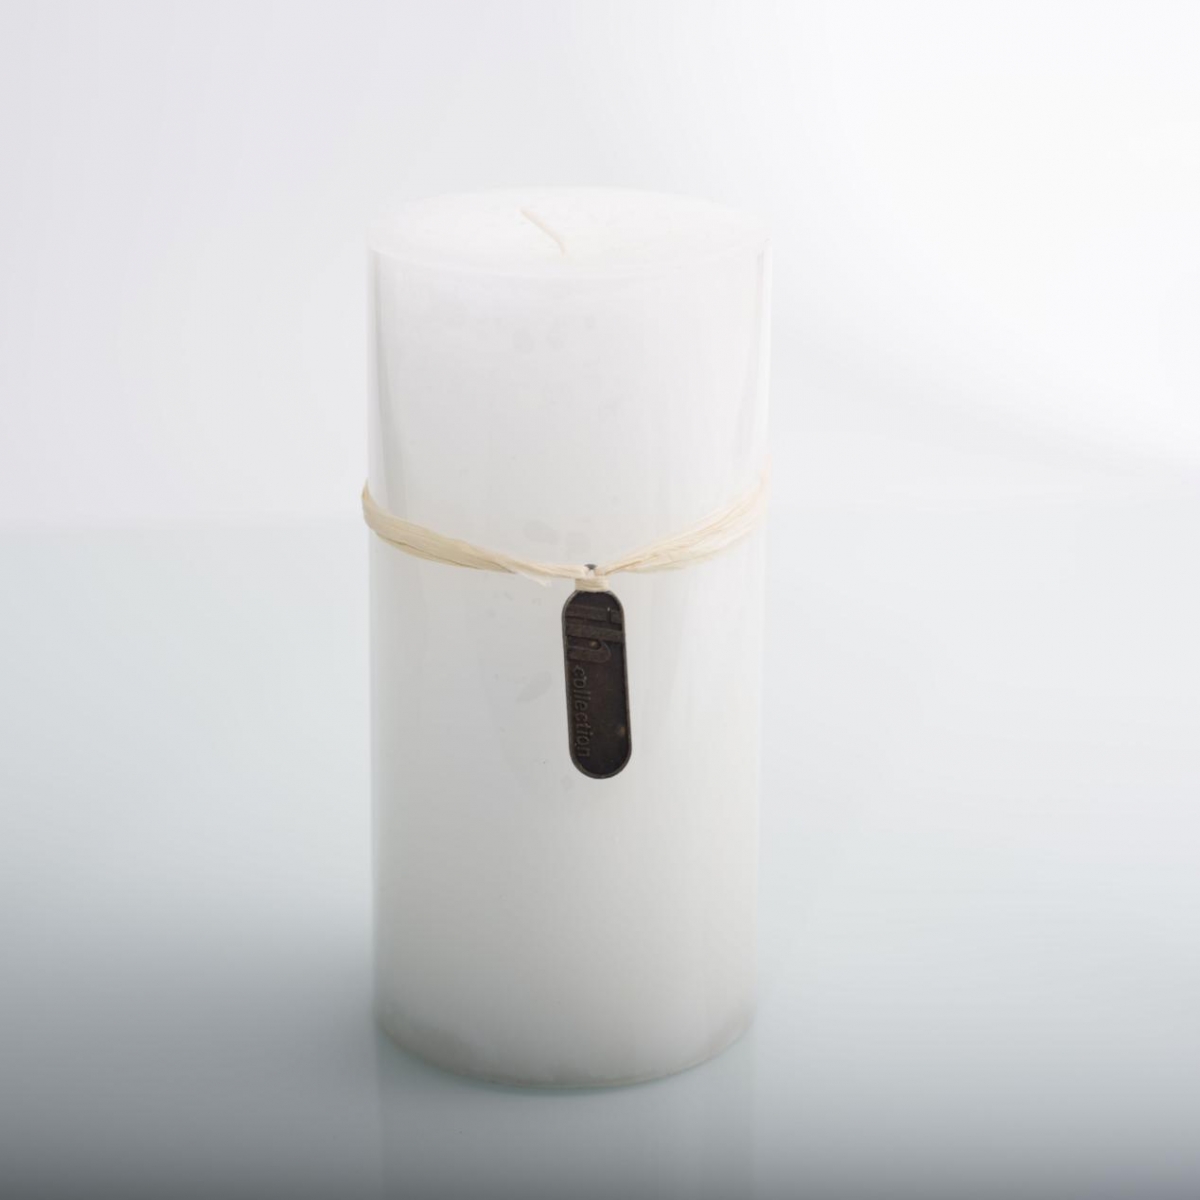 Big Pillar Candles ：Three Gradient Color ,Soy Wax ,Home Sweet Home ,Raffia,Centerpiece ,China Factory ,Good Price-HOWCANDLE-Candles,Scented Candles,Aromatherapy Candles,Soy Candles,Vegan Candles,Jar Candles,Pillar Candles,Candle Gift Sets,Essential Oils,Reed Diffuser,Candle Holder,